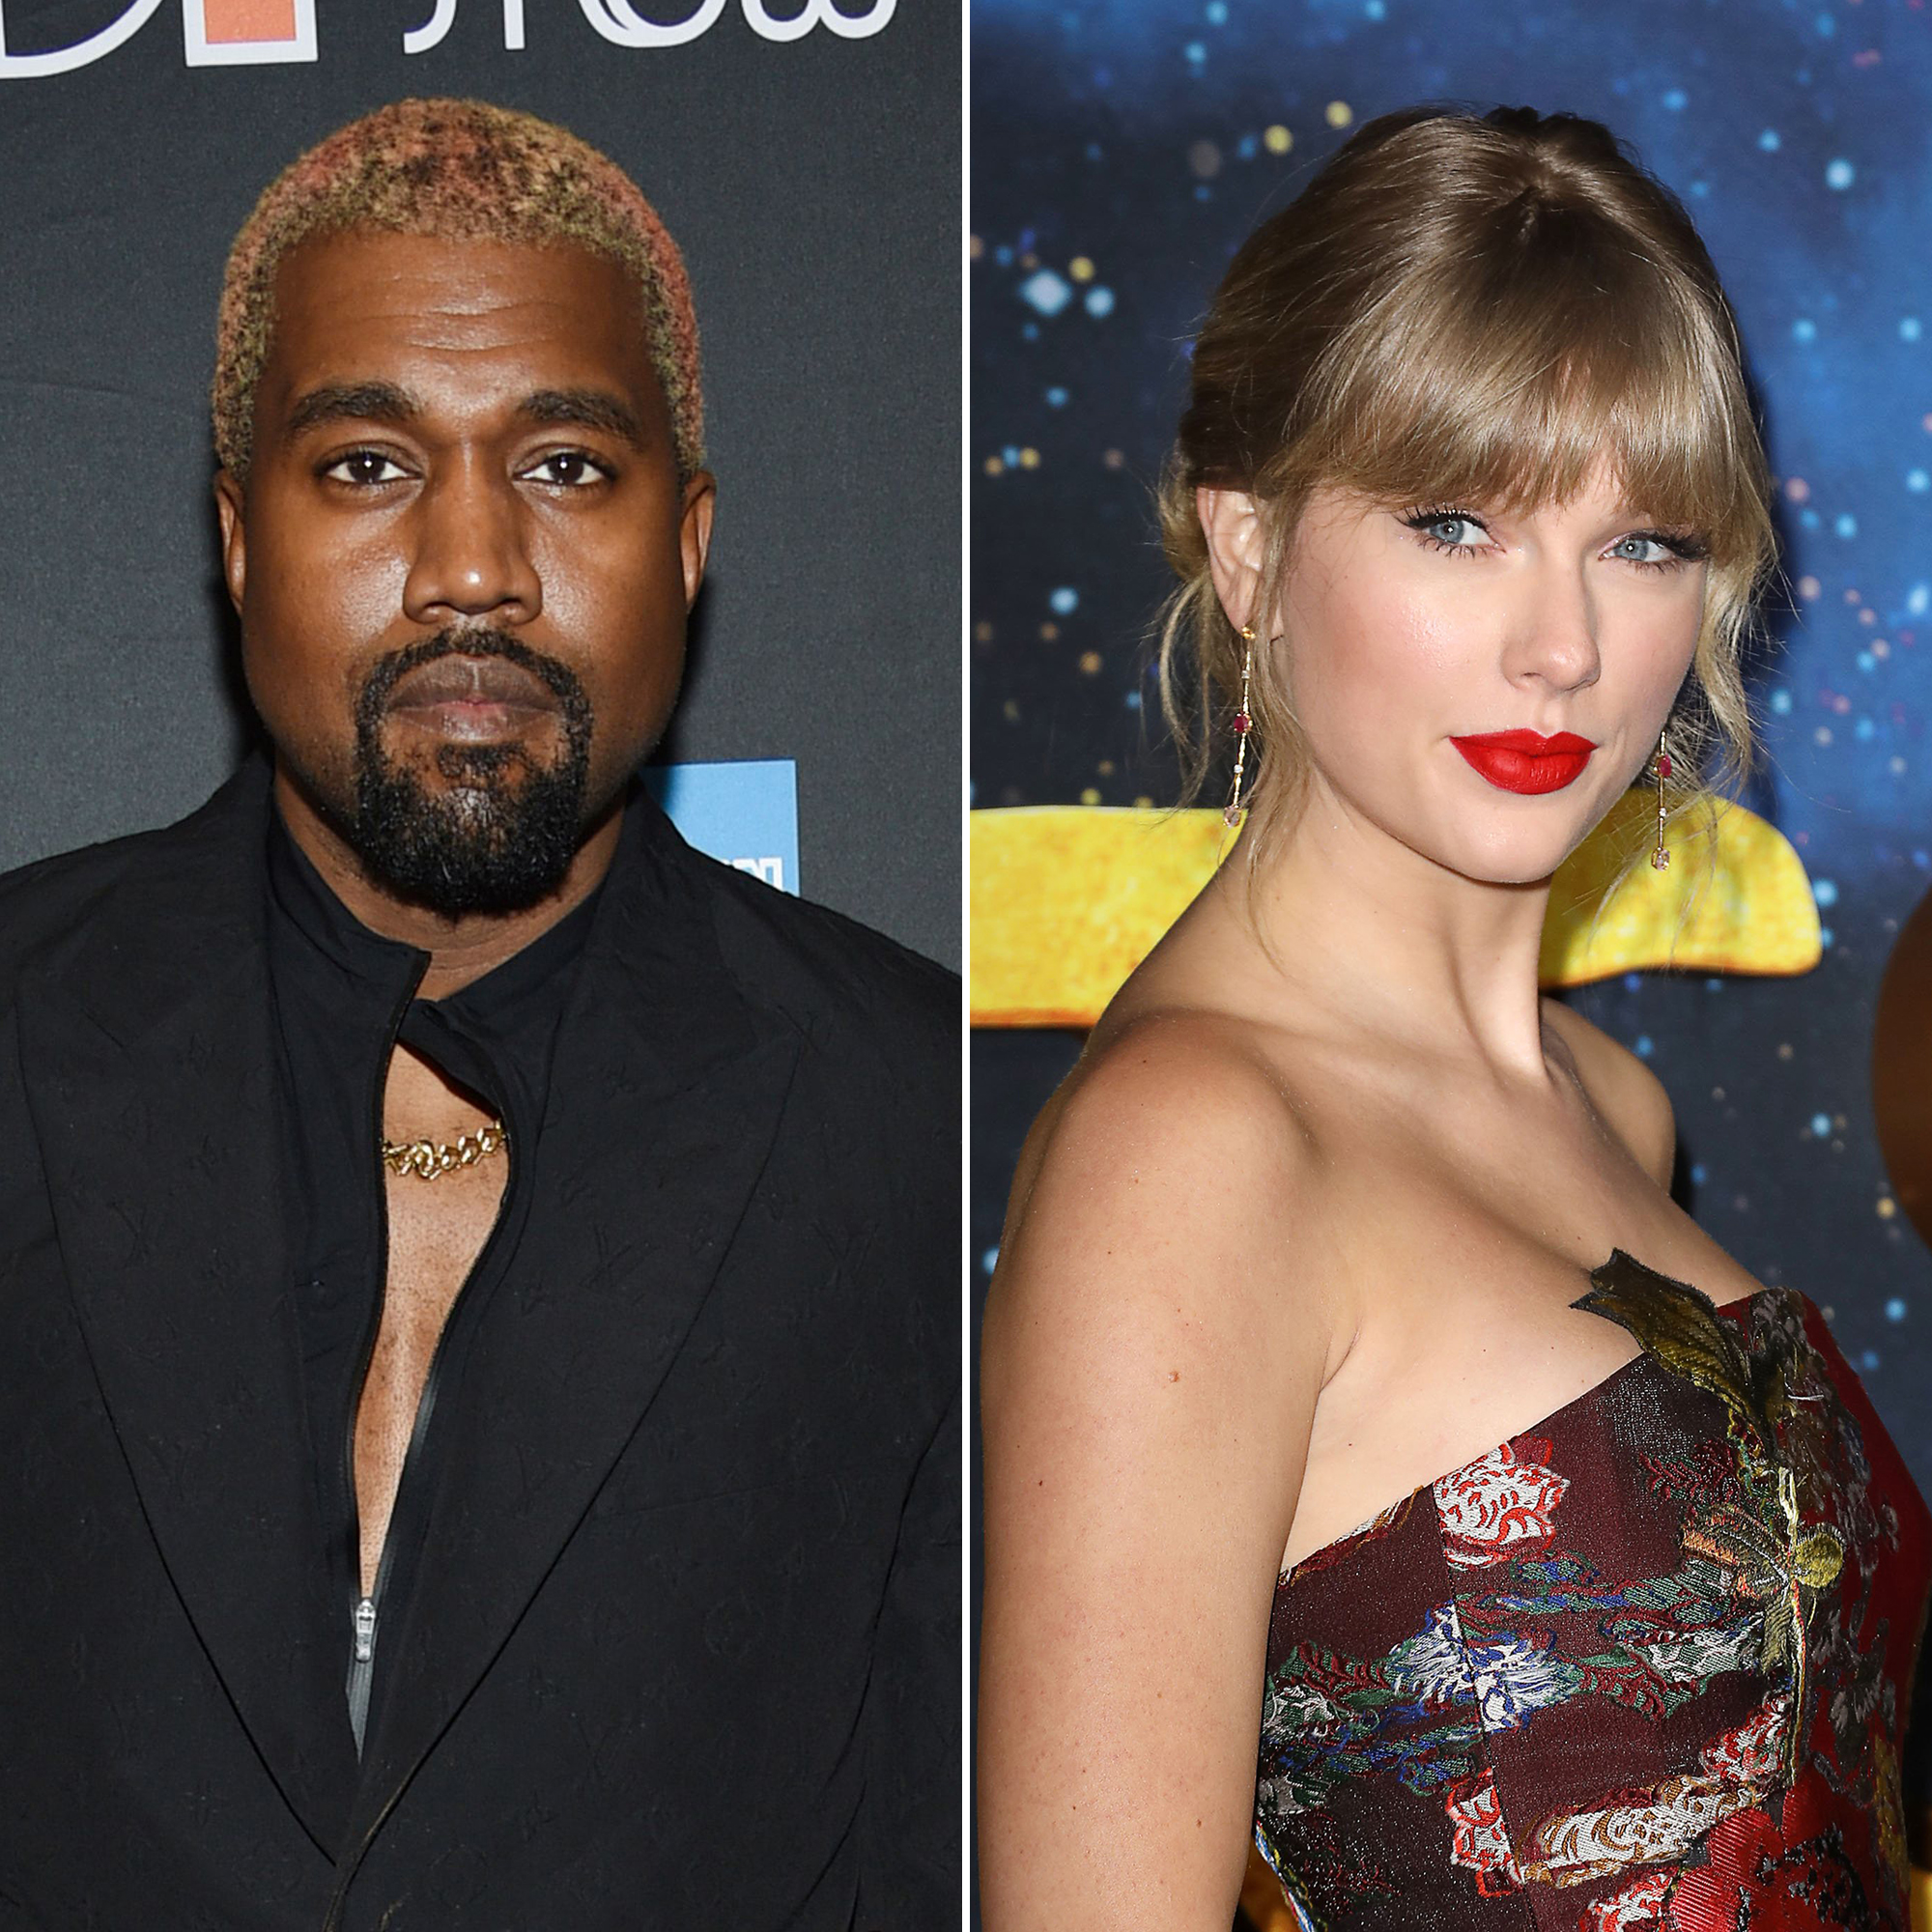 Taylor Swift Peeing Porn - Kanye West Vows to Get Taylor Swift Her Music Back Amid Twitter Rant